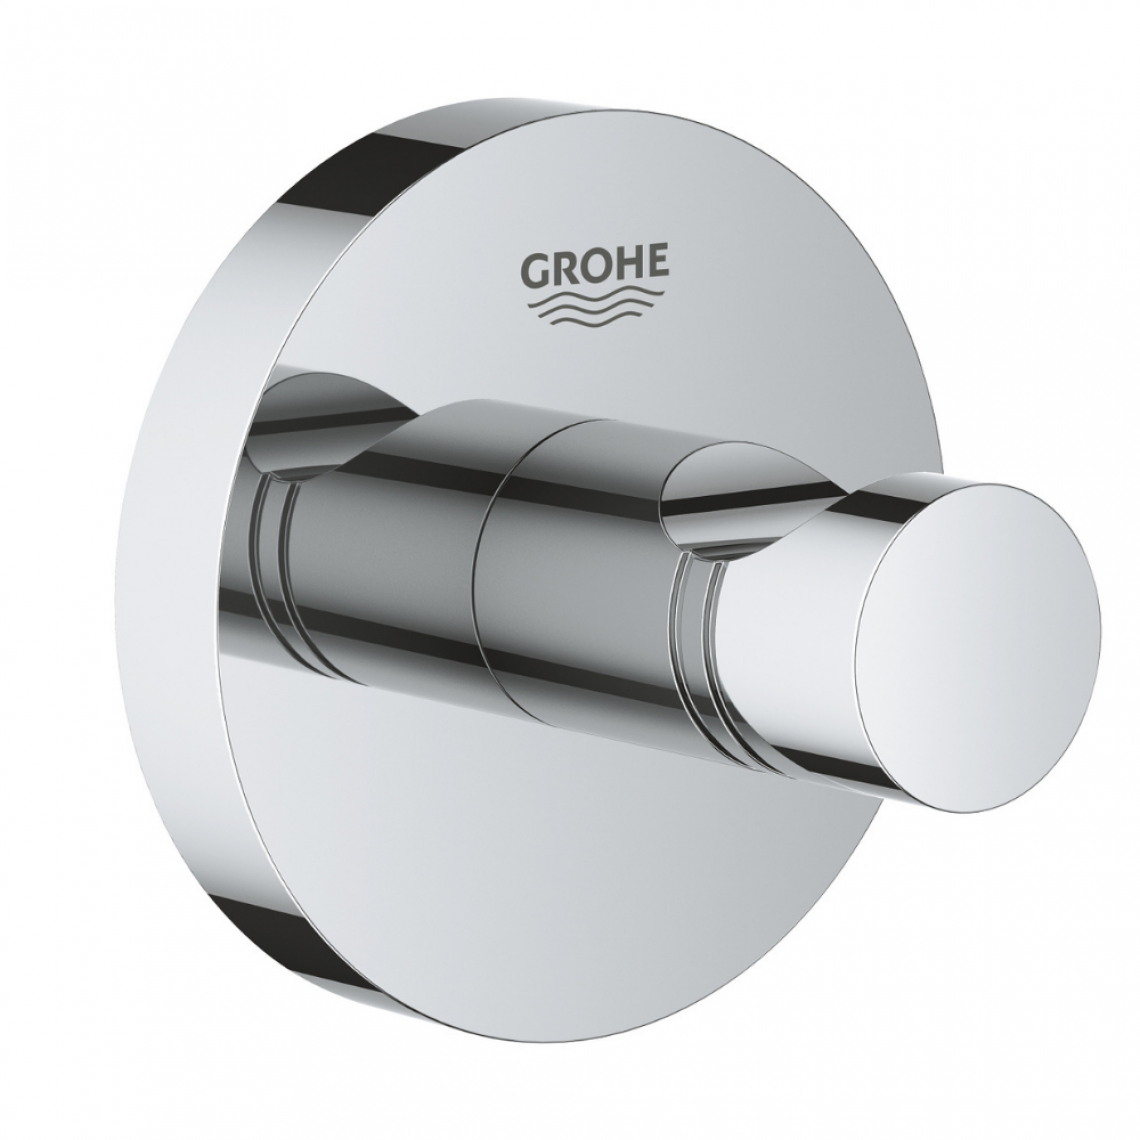 Grohe - Grohe Patère murale Essentials - Patère